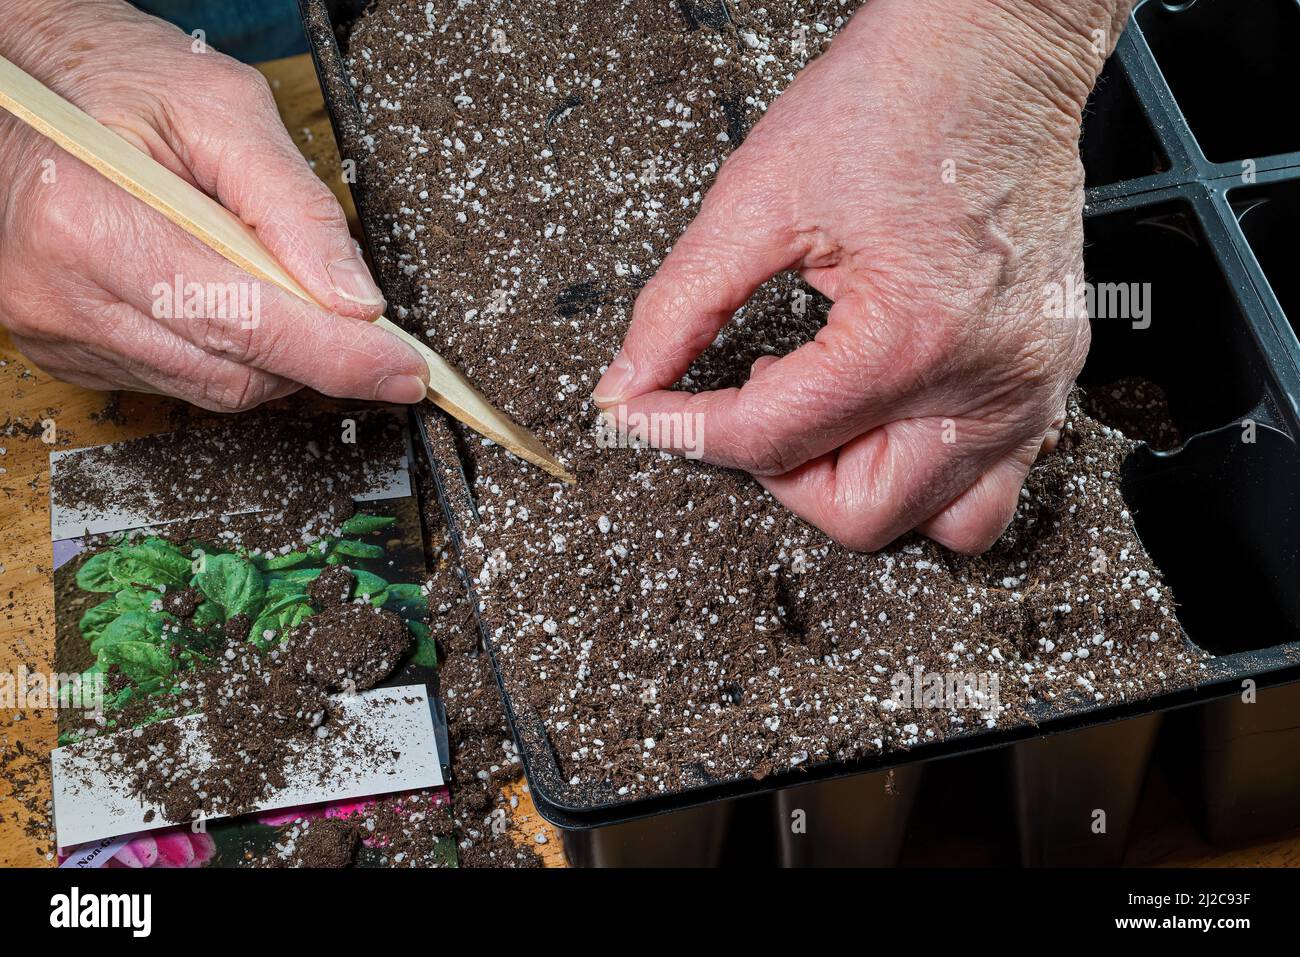 Woman’s weathered hands planting annual flower and vegetable seeds into planting trays in preparation of the springtime growing season. Stock Photo